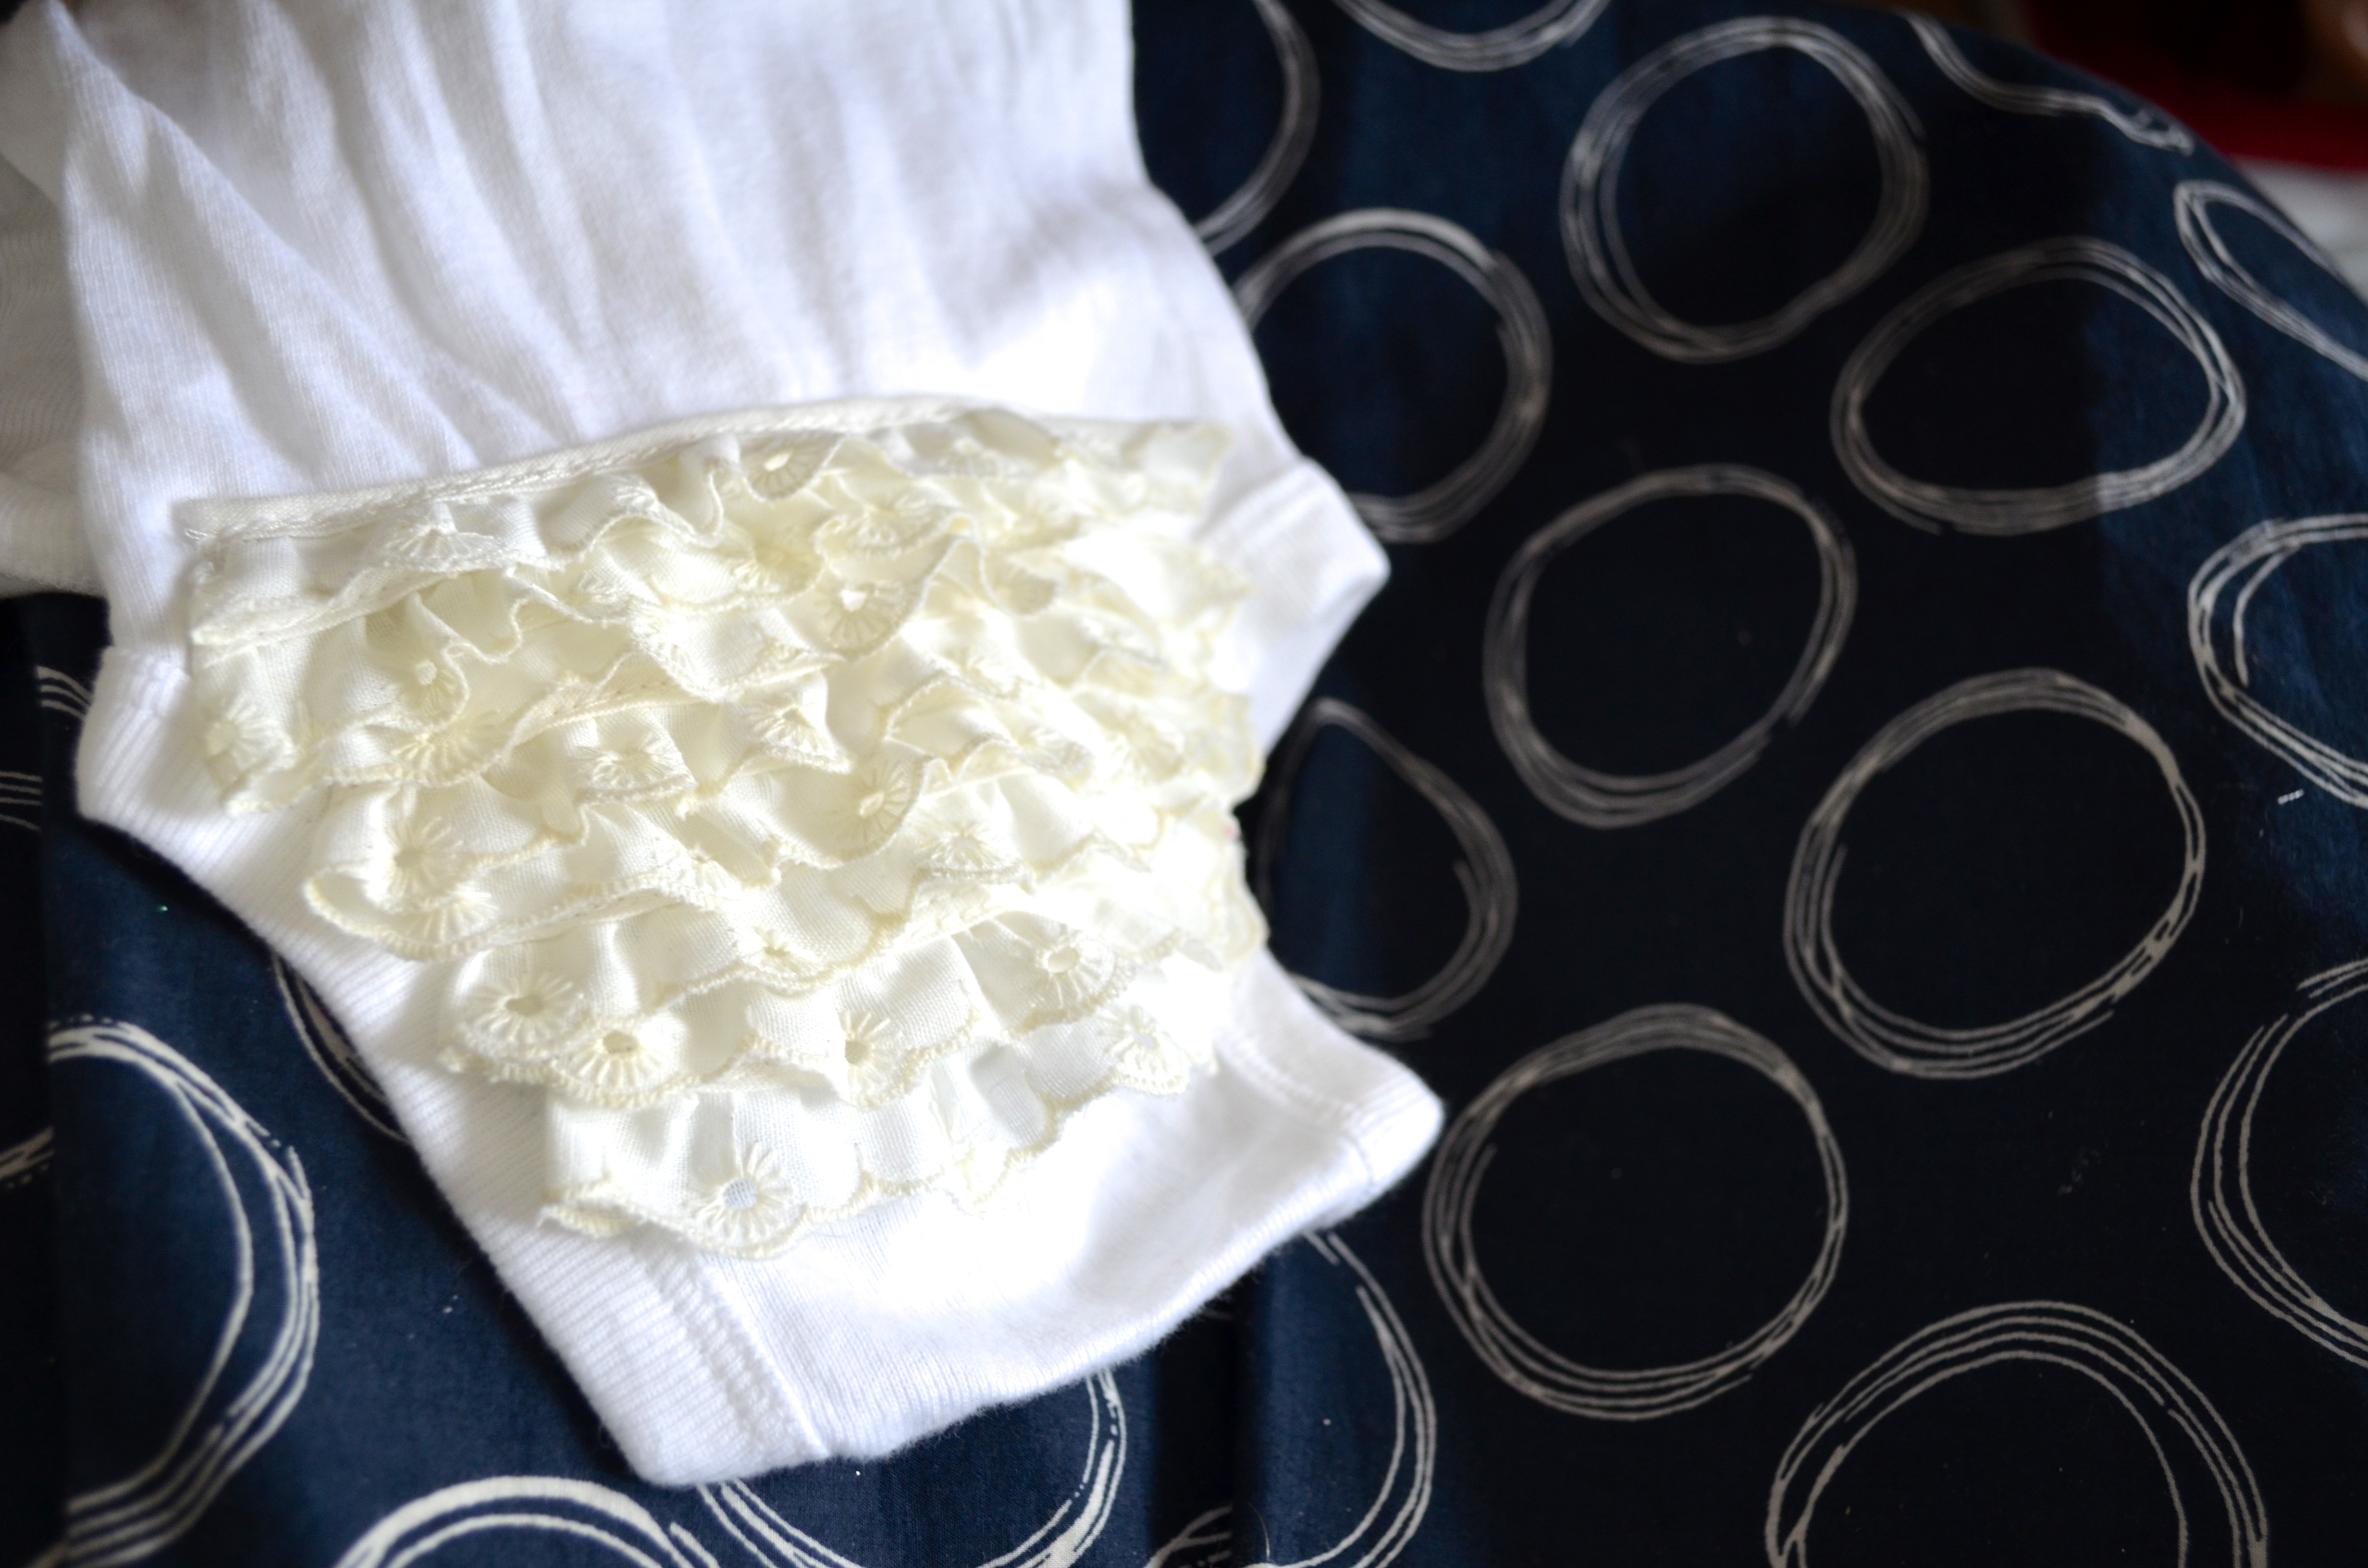 DIY ruffle bottom onesie tutorial from the Path Less Traveled